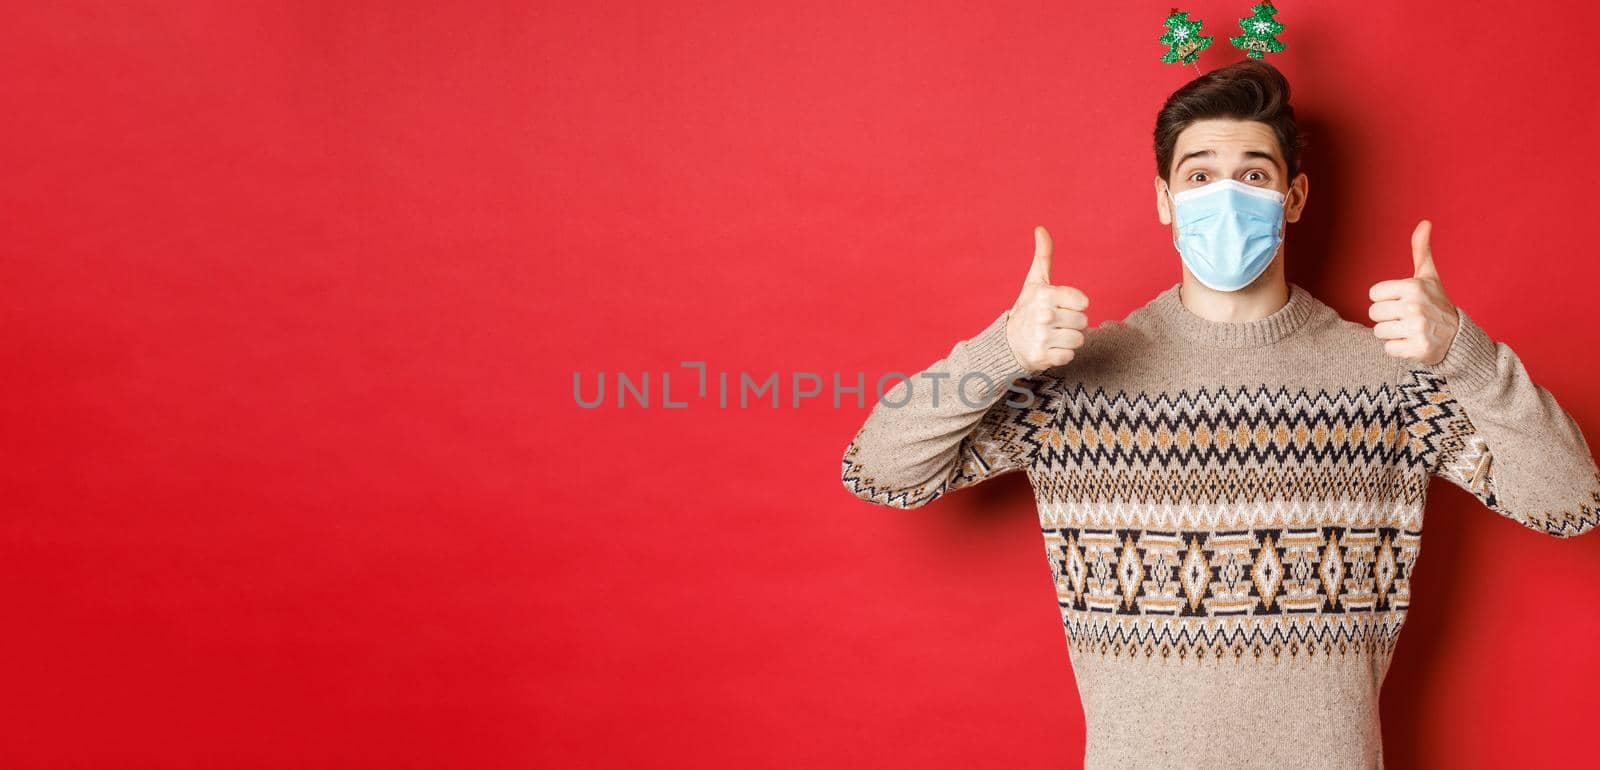 Concept of new year, covid-19 and social distancing. Cheerful caucasian man in sweater and medical mask, celebrating christmas during pandemic, showing thumbs-up, red background.